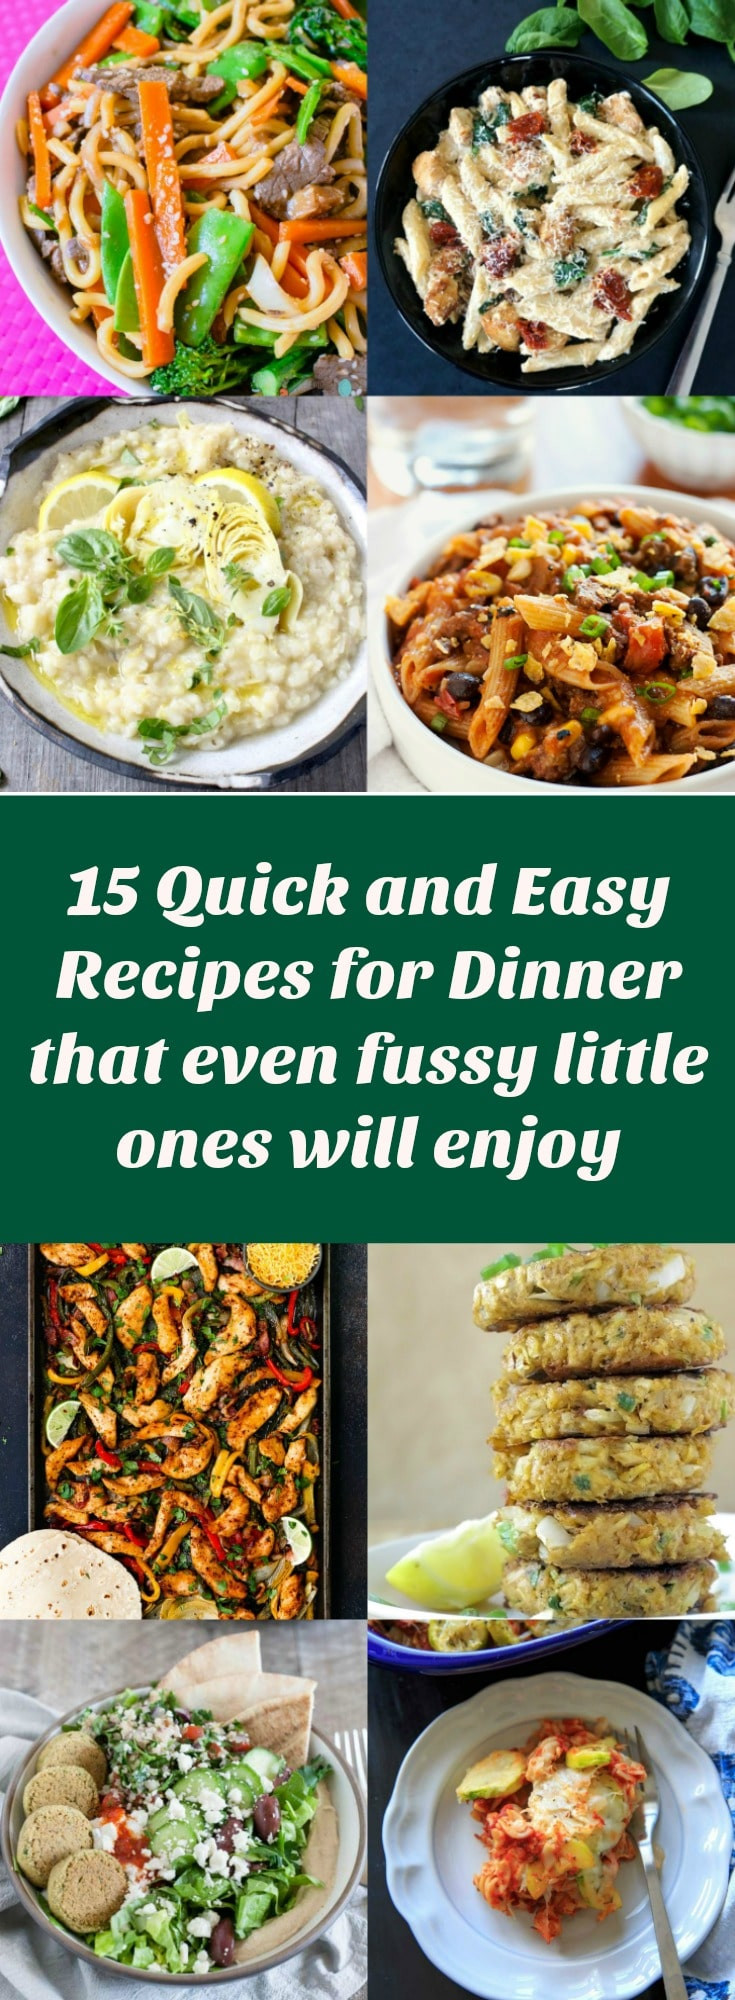 Quick Dinner Recipes For 4
 15 Quick and easy recipes for dinner that even fussy